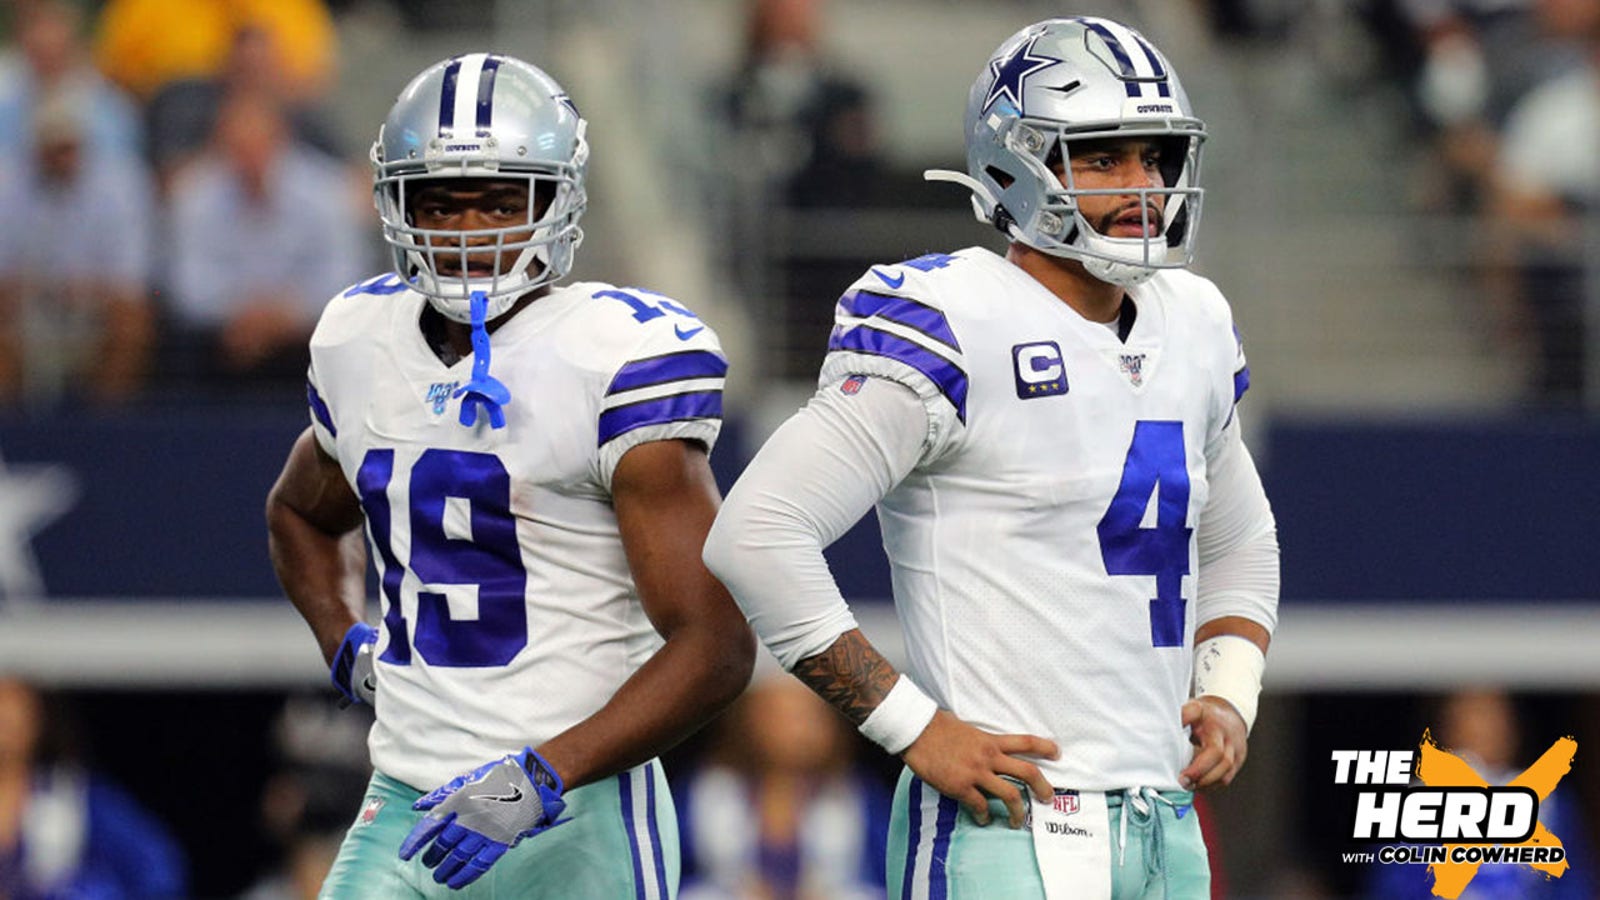 Colin Cowherd on the dynamic between Dak Prescott & Amari Cooper: 'Great QBs don't need to be lifted'